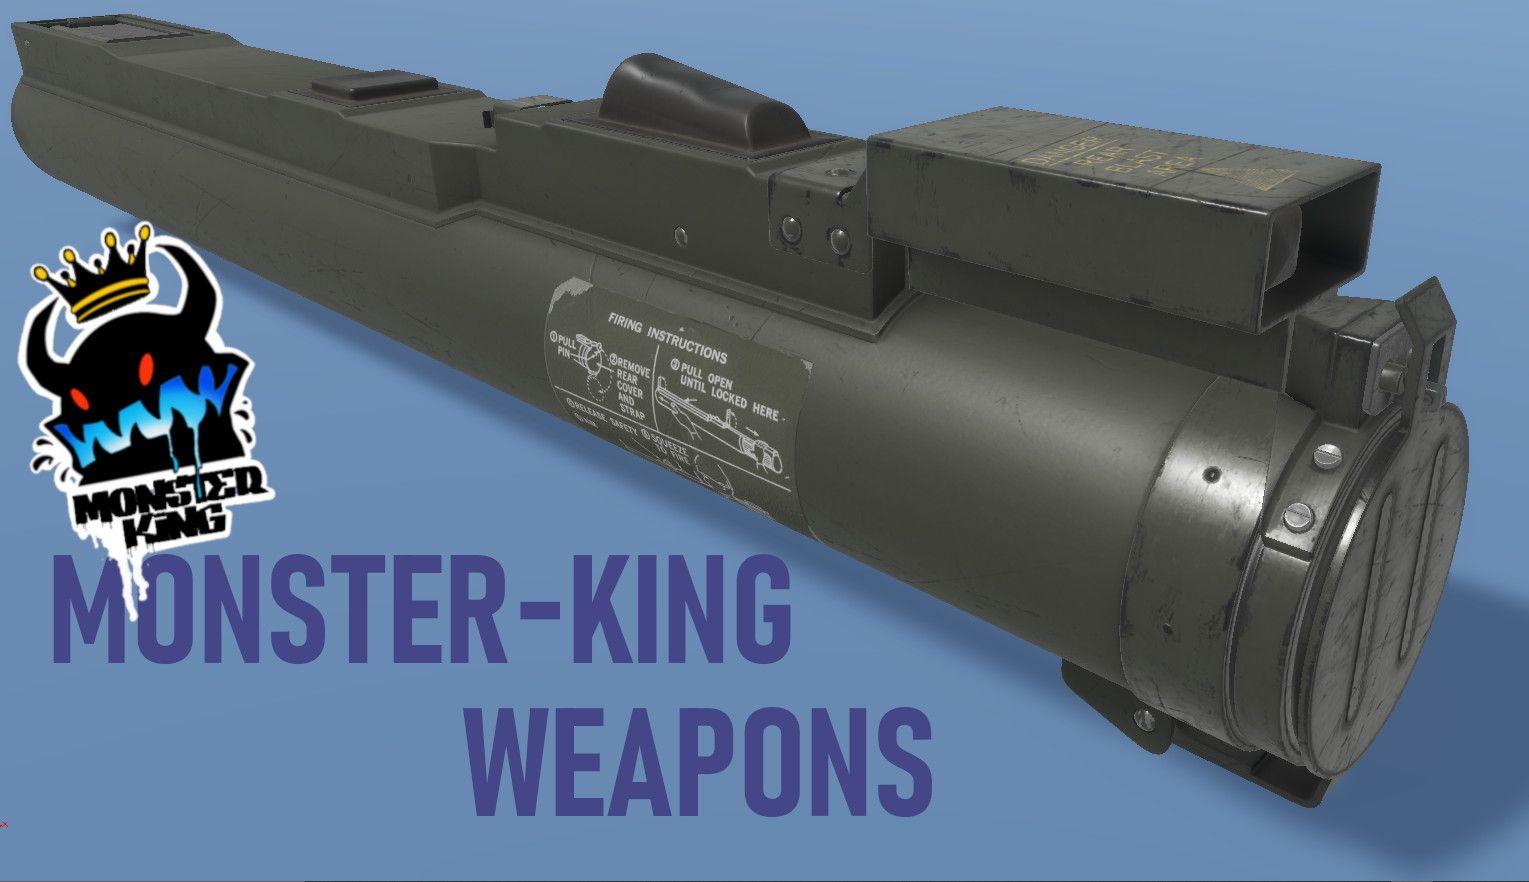 Monster-King Weapons